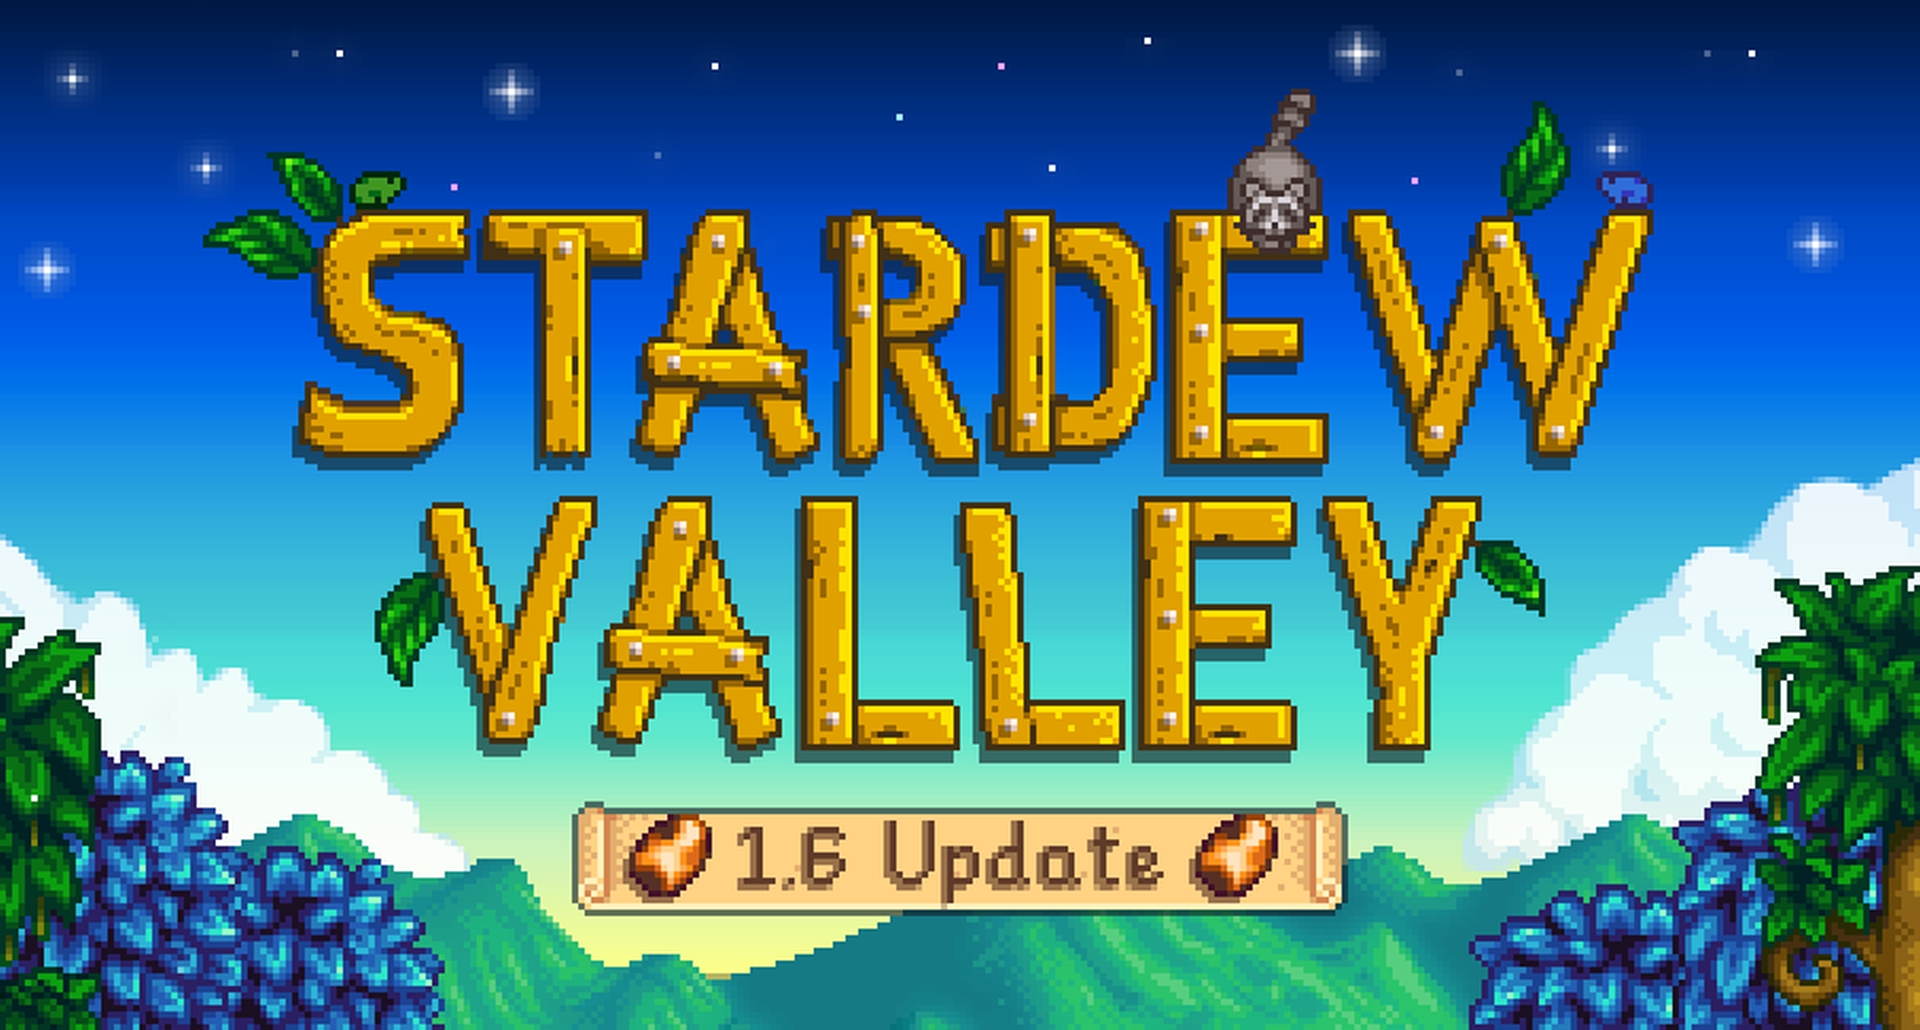 Stardew Valley update 1.6 to be released on 16th March for PC, developer announces